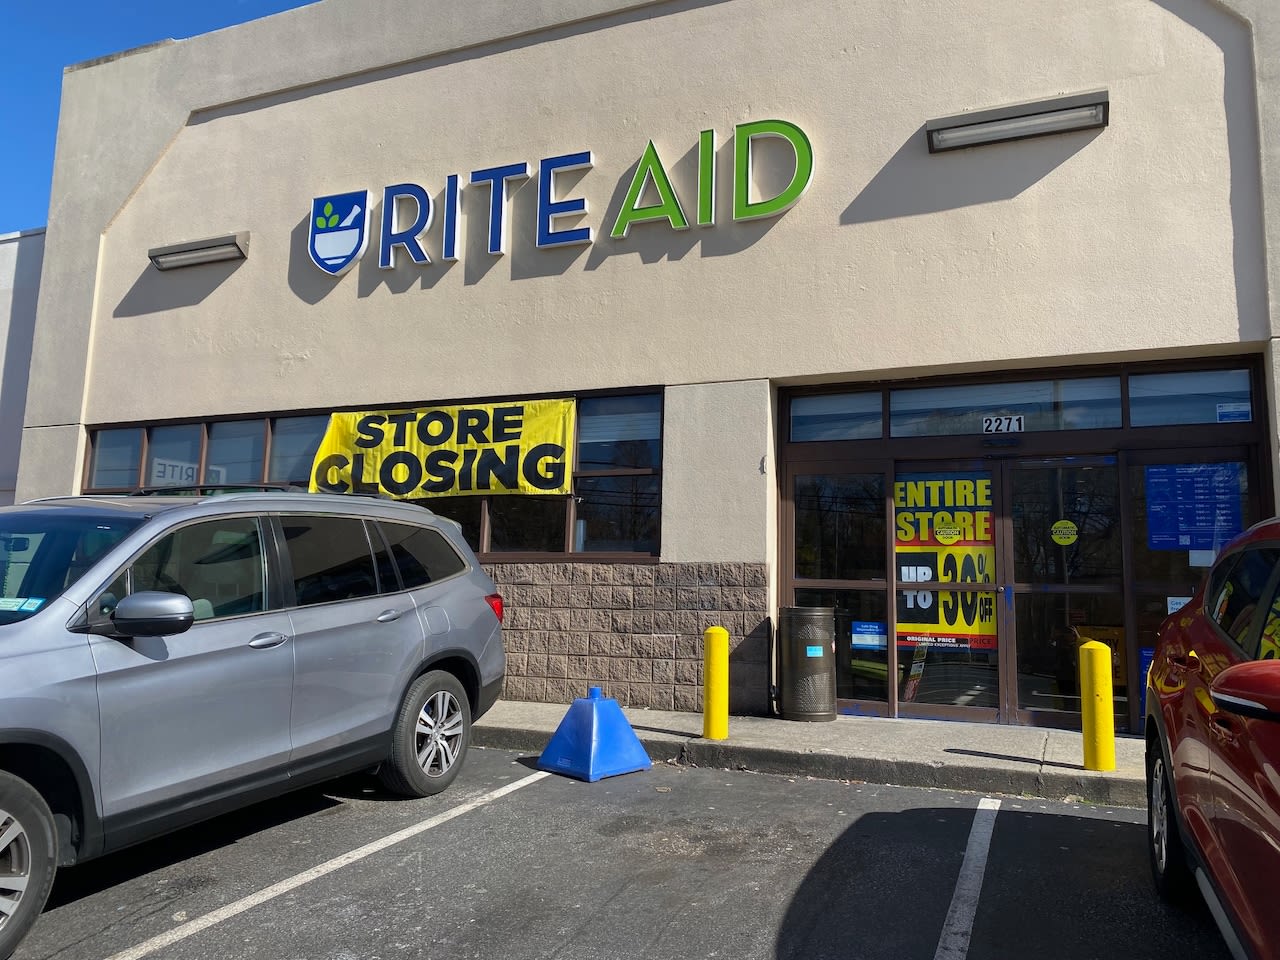 Rite Aid to close 55 more stores. Here’s the full list.